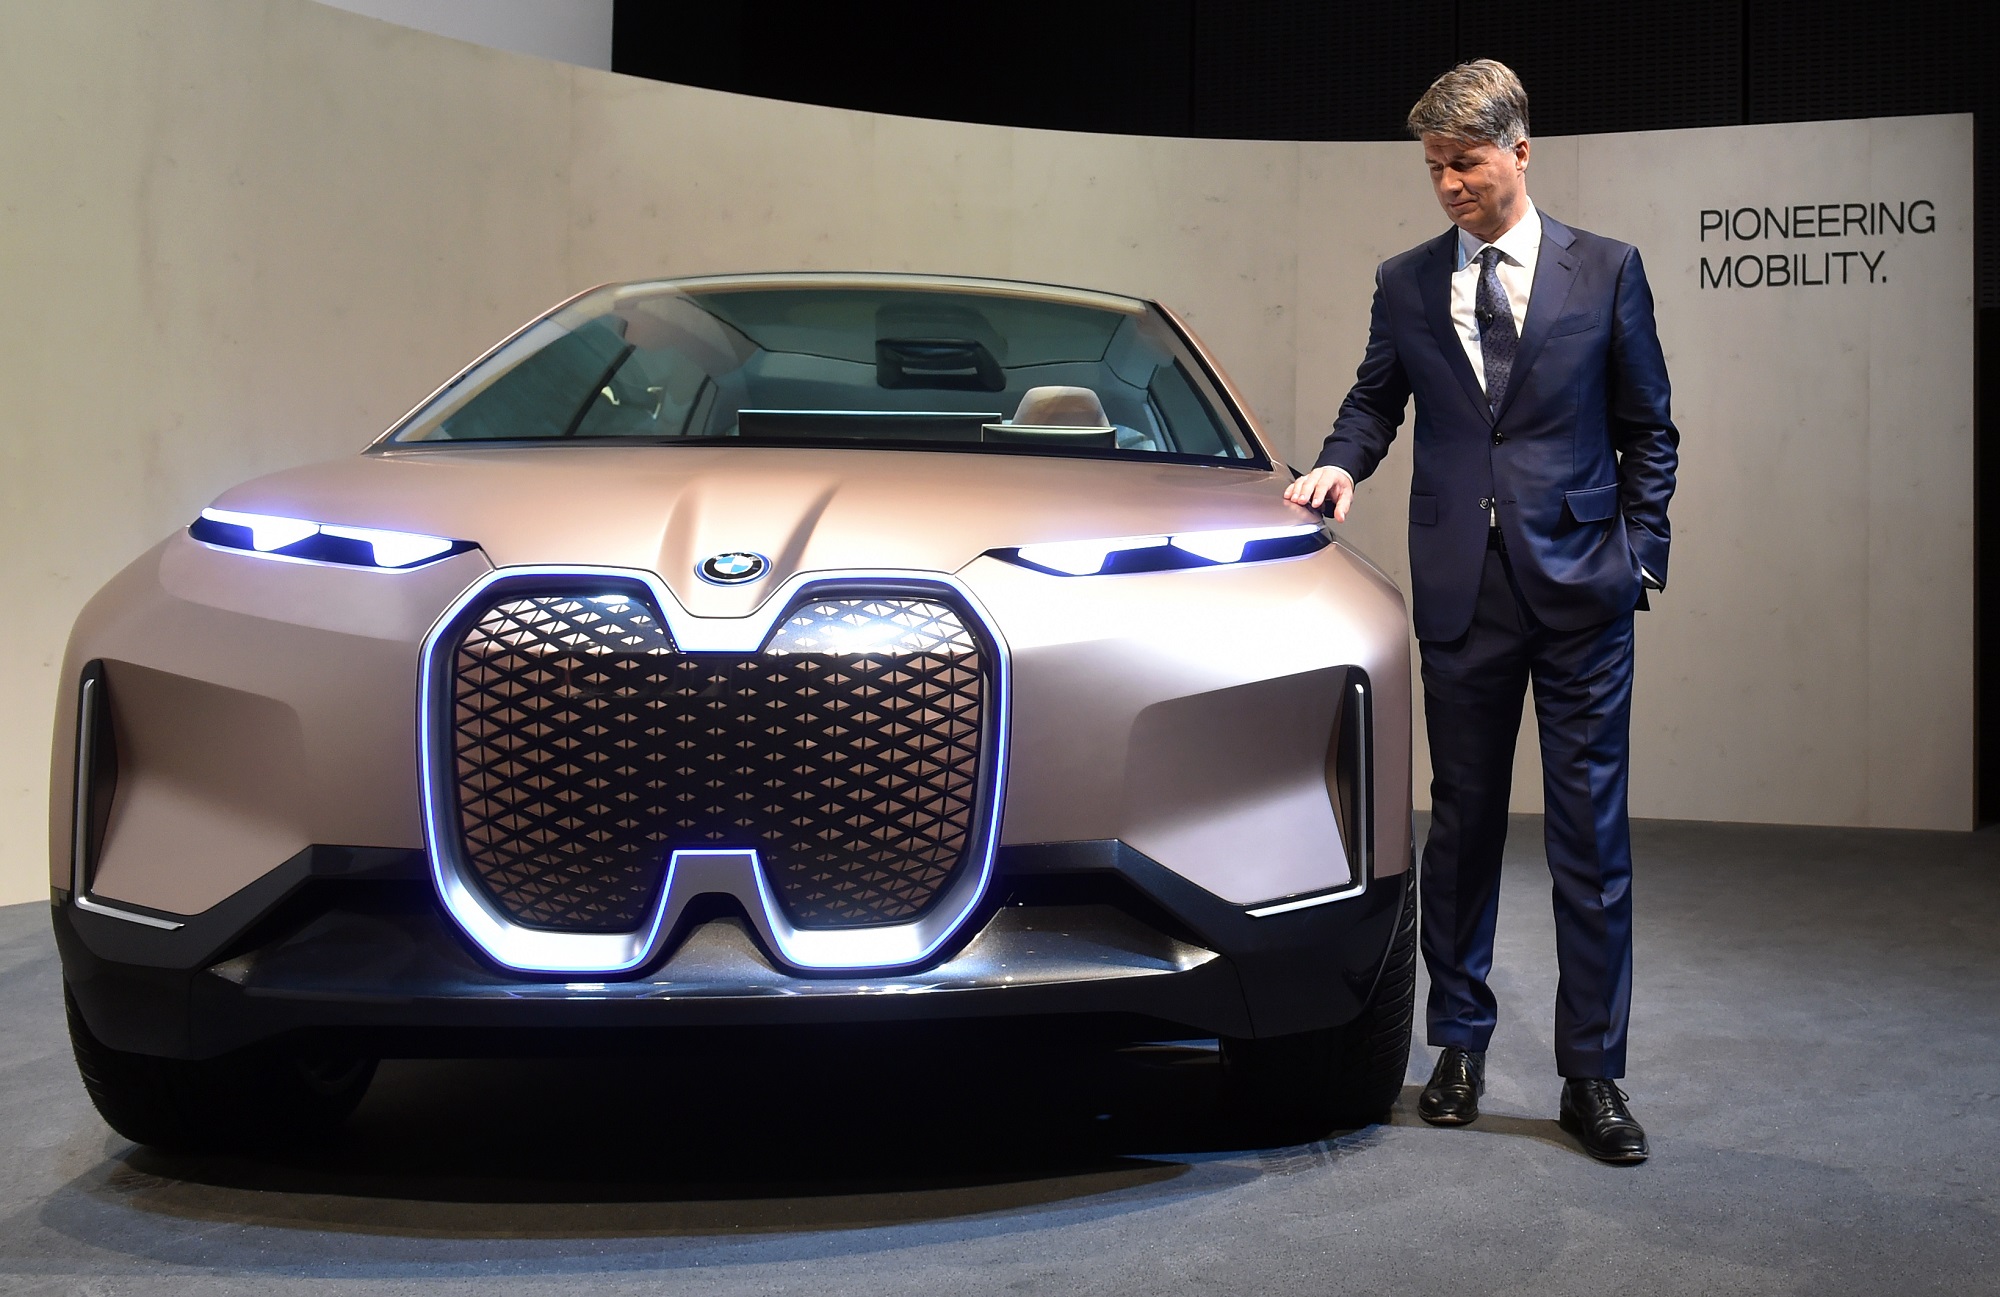 BMW iX heralds a new age in mobility